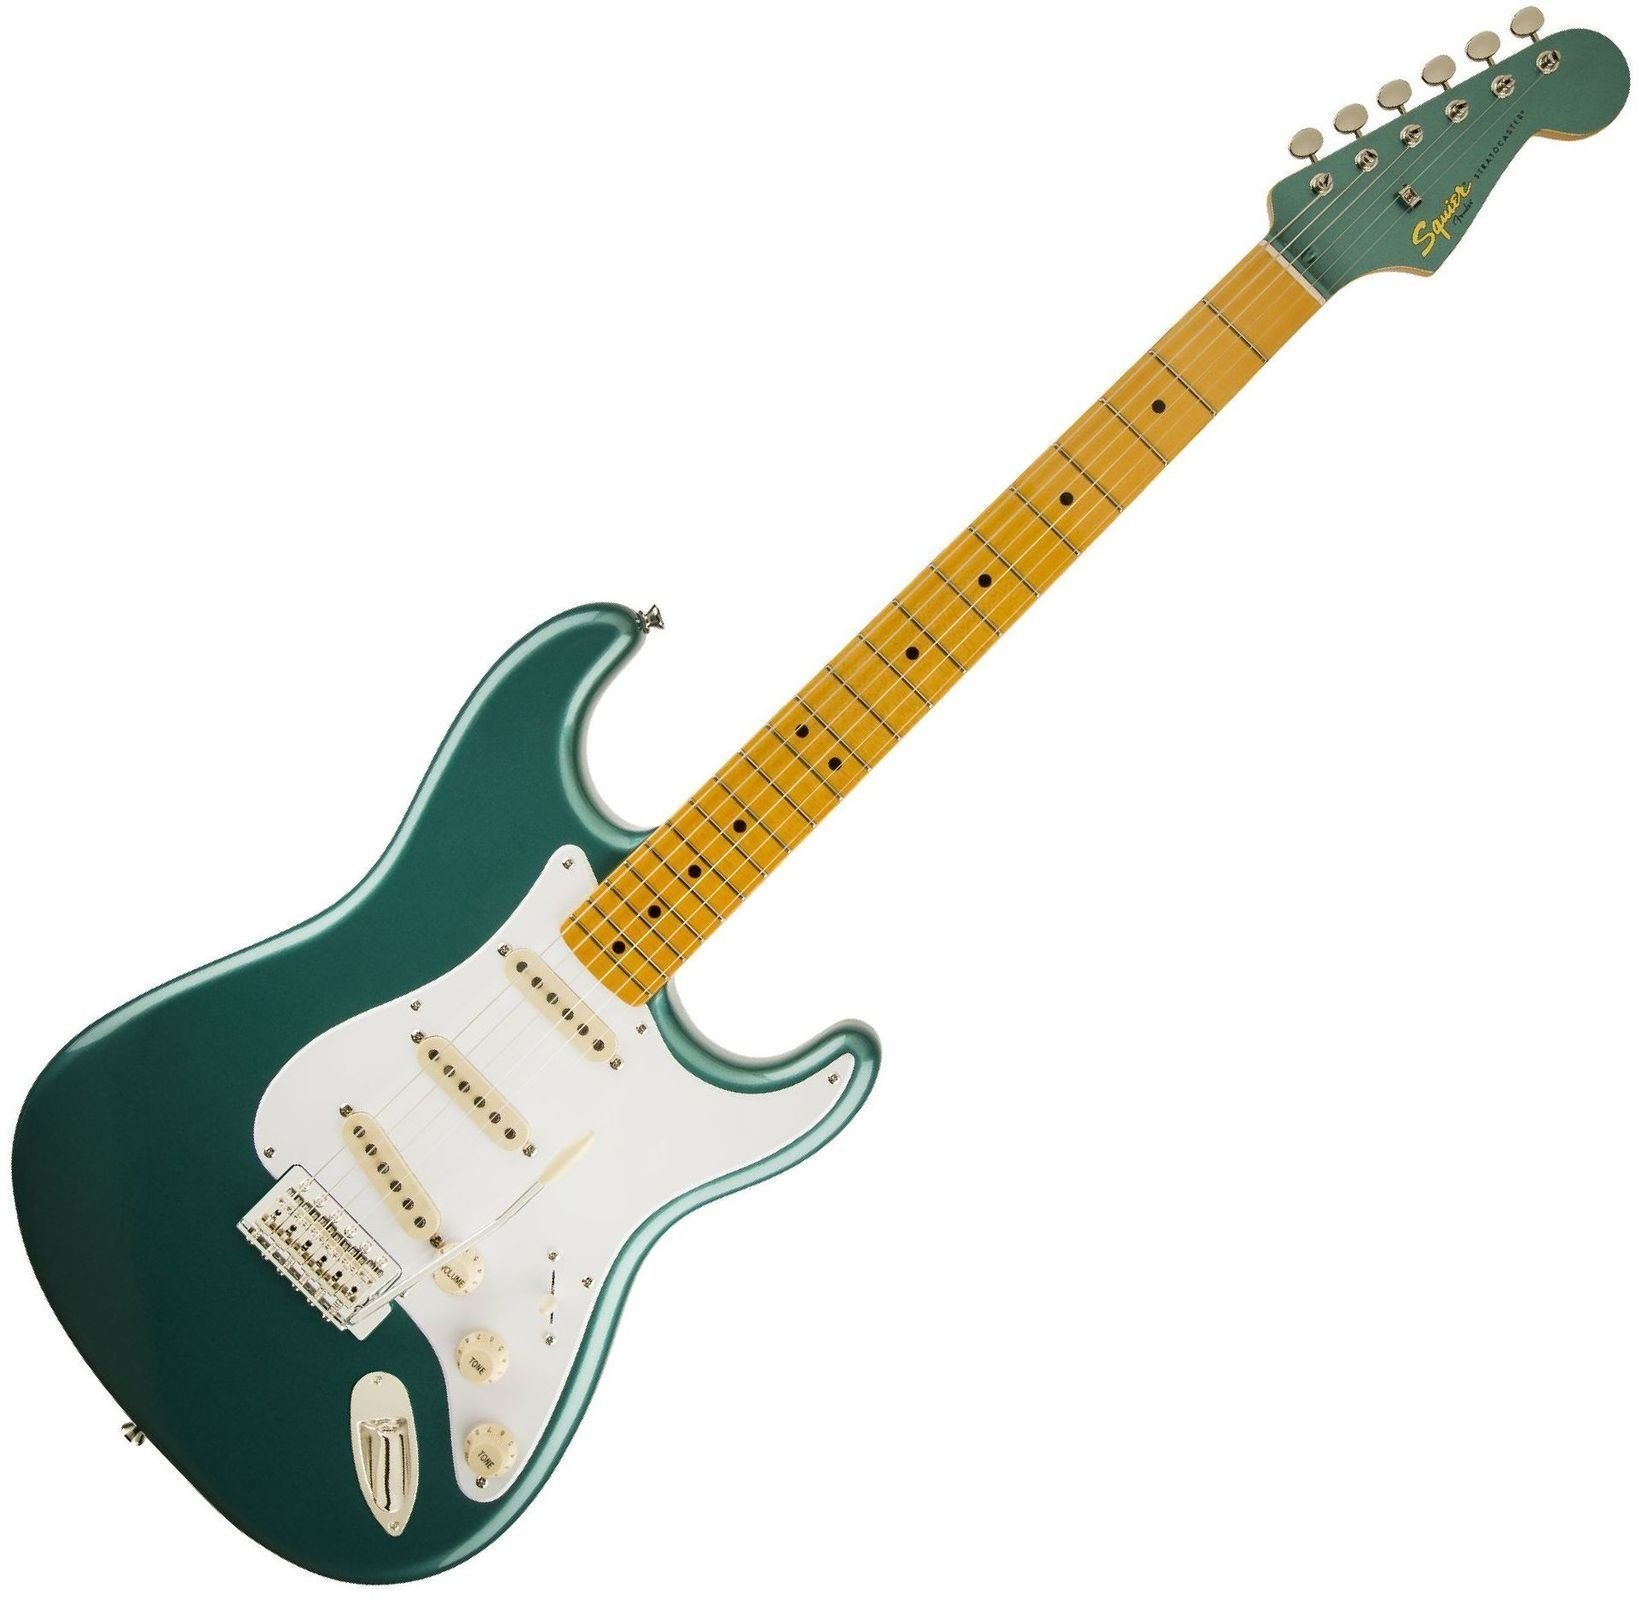 Electric guitar Fender Squier Classic Vibe Stratocaster 50s Sherwood Metallic Green